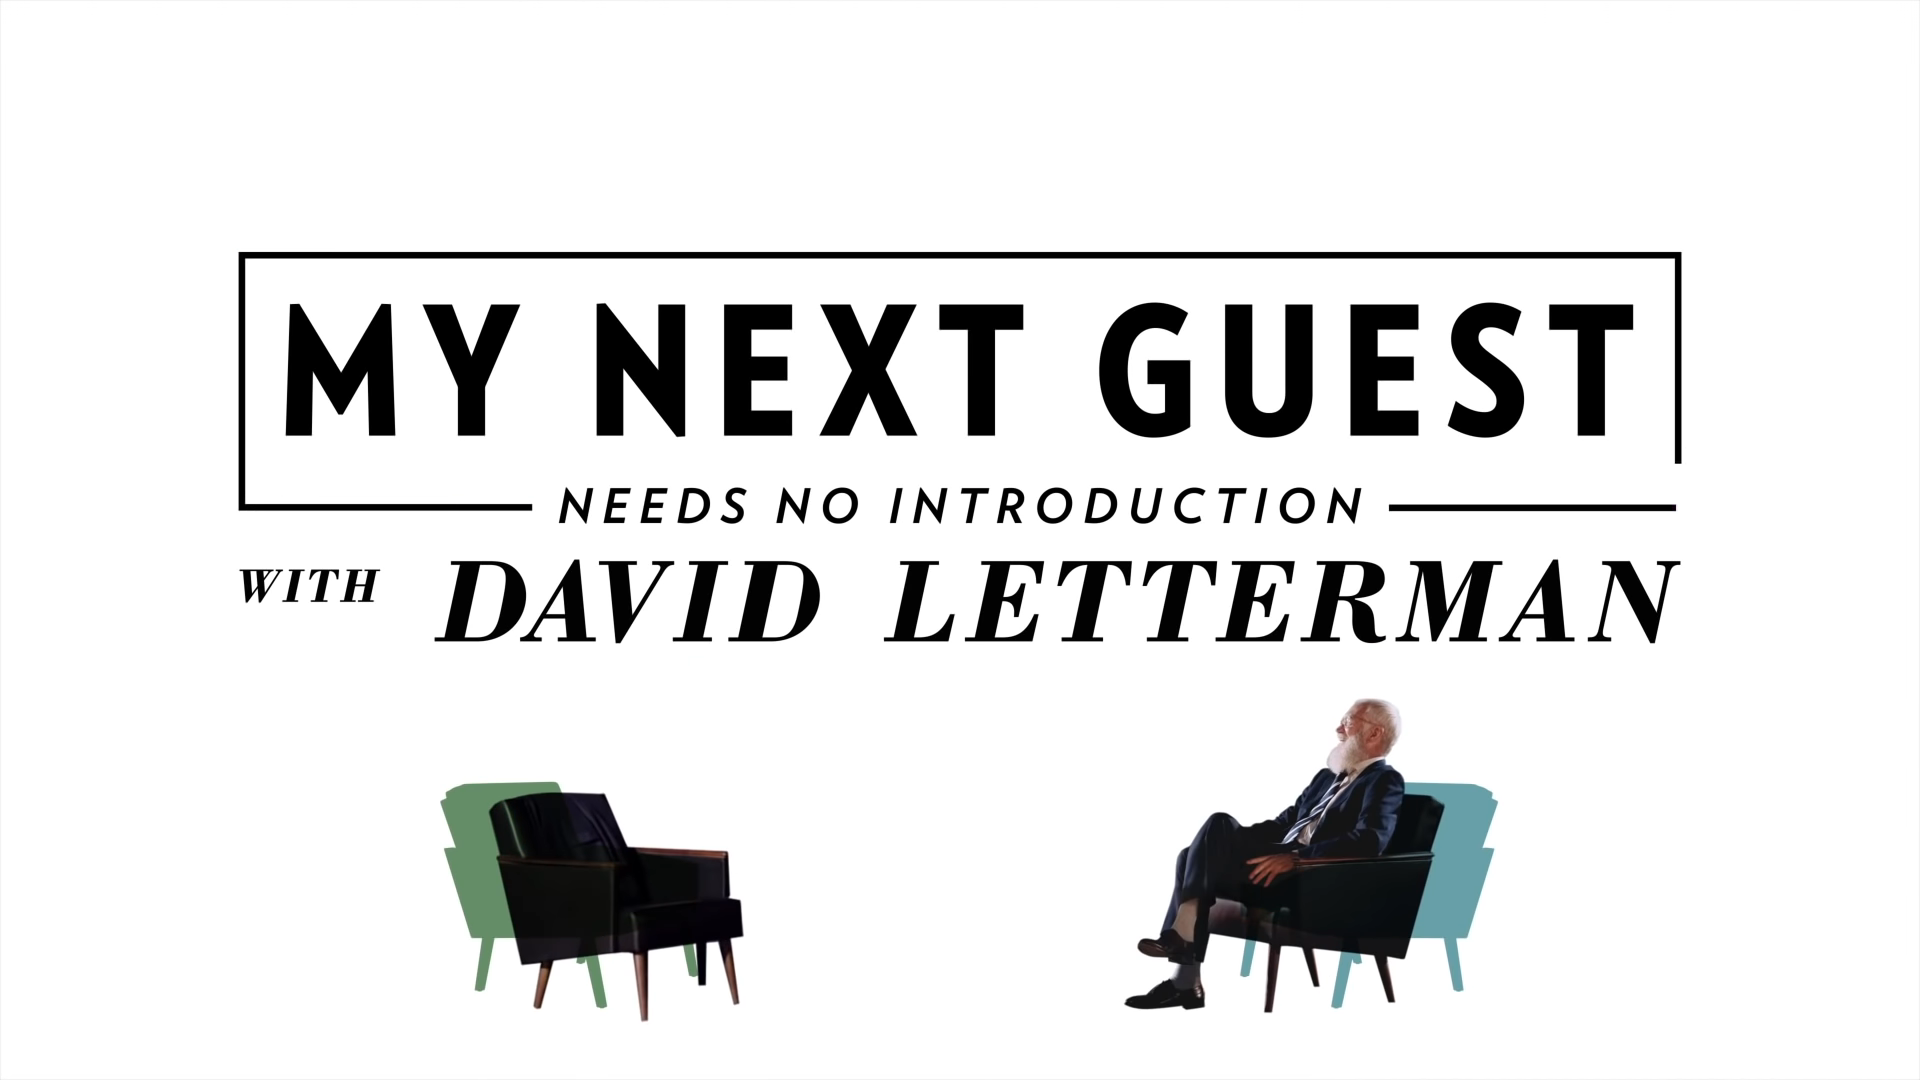 My Next Guest Needs No Introduction with David Letterman: Season 2 [TRAILER] Coming to Netflix May 31, 2019 2